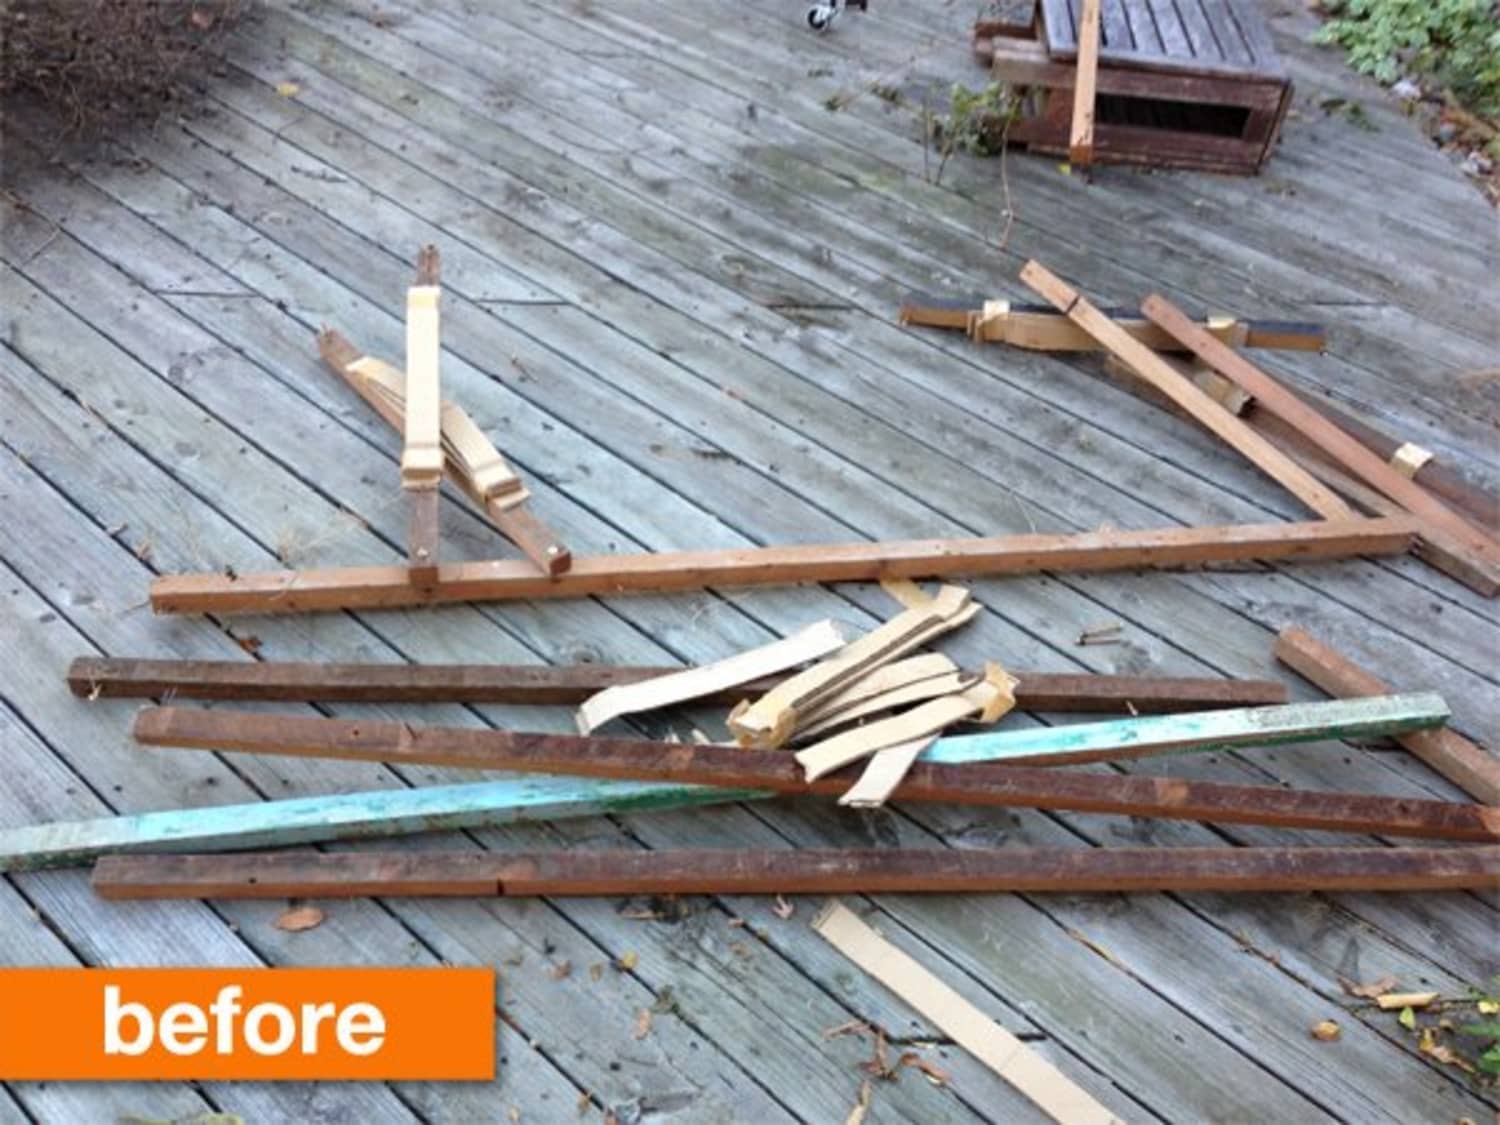 Before & After: From Salvaged Wood to Stylish Reclaimed Headboard